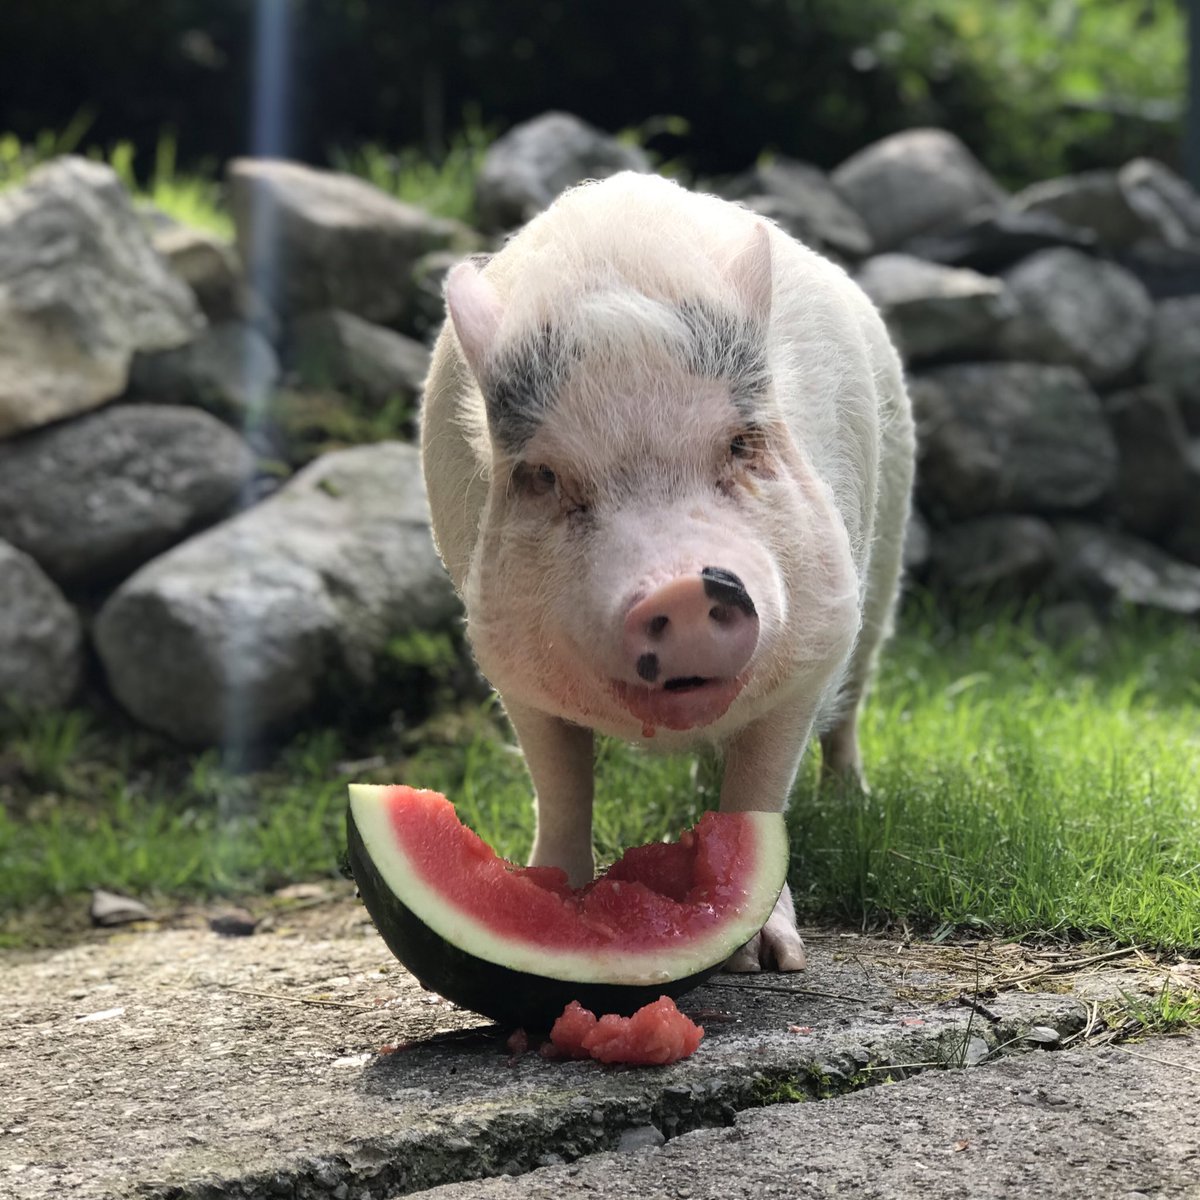 Our favorite summer snack 🍉  #NationalWatermelonDay